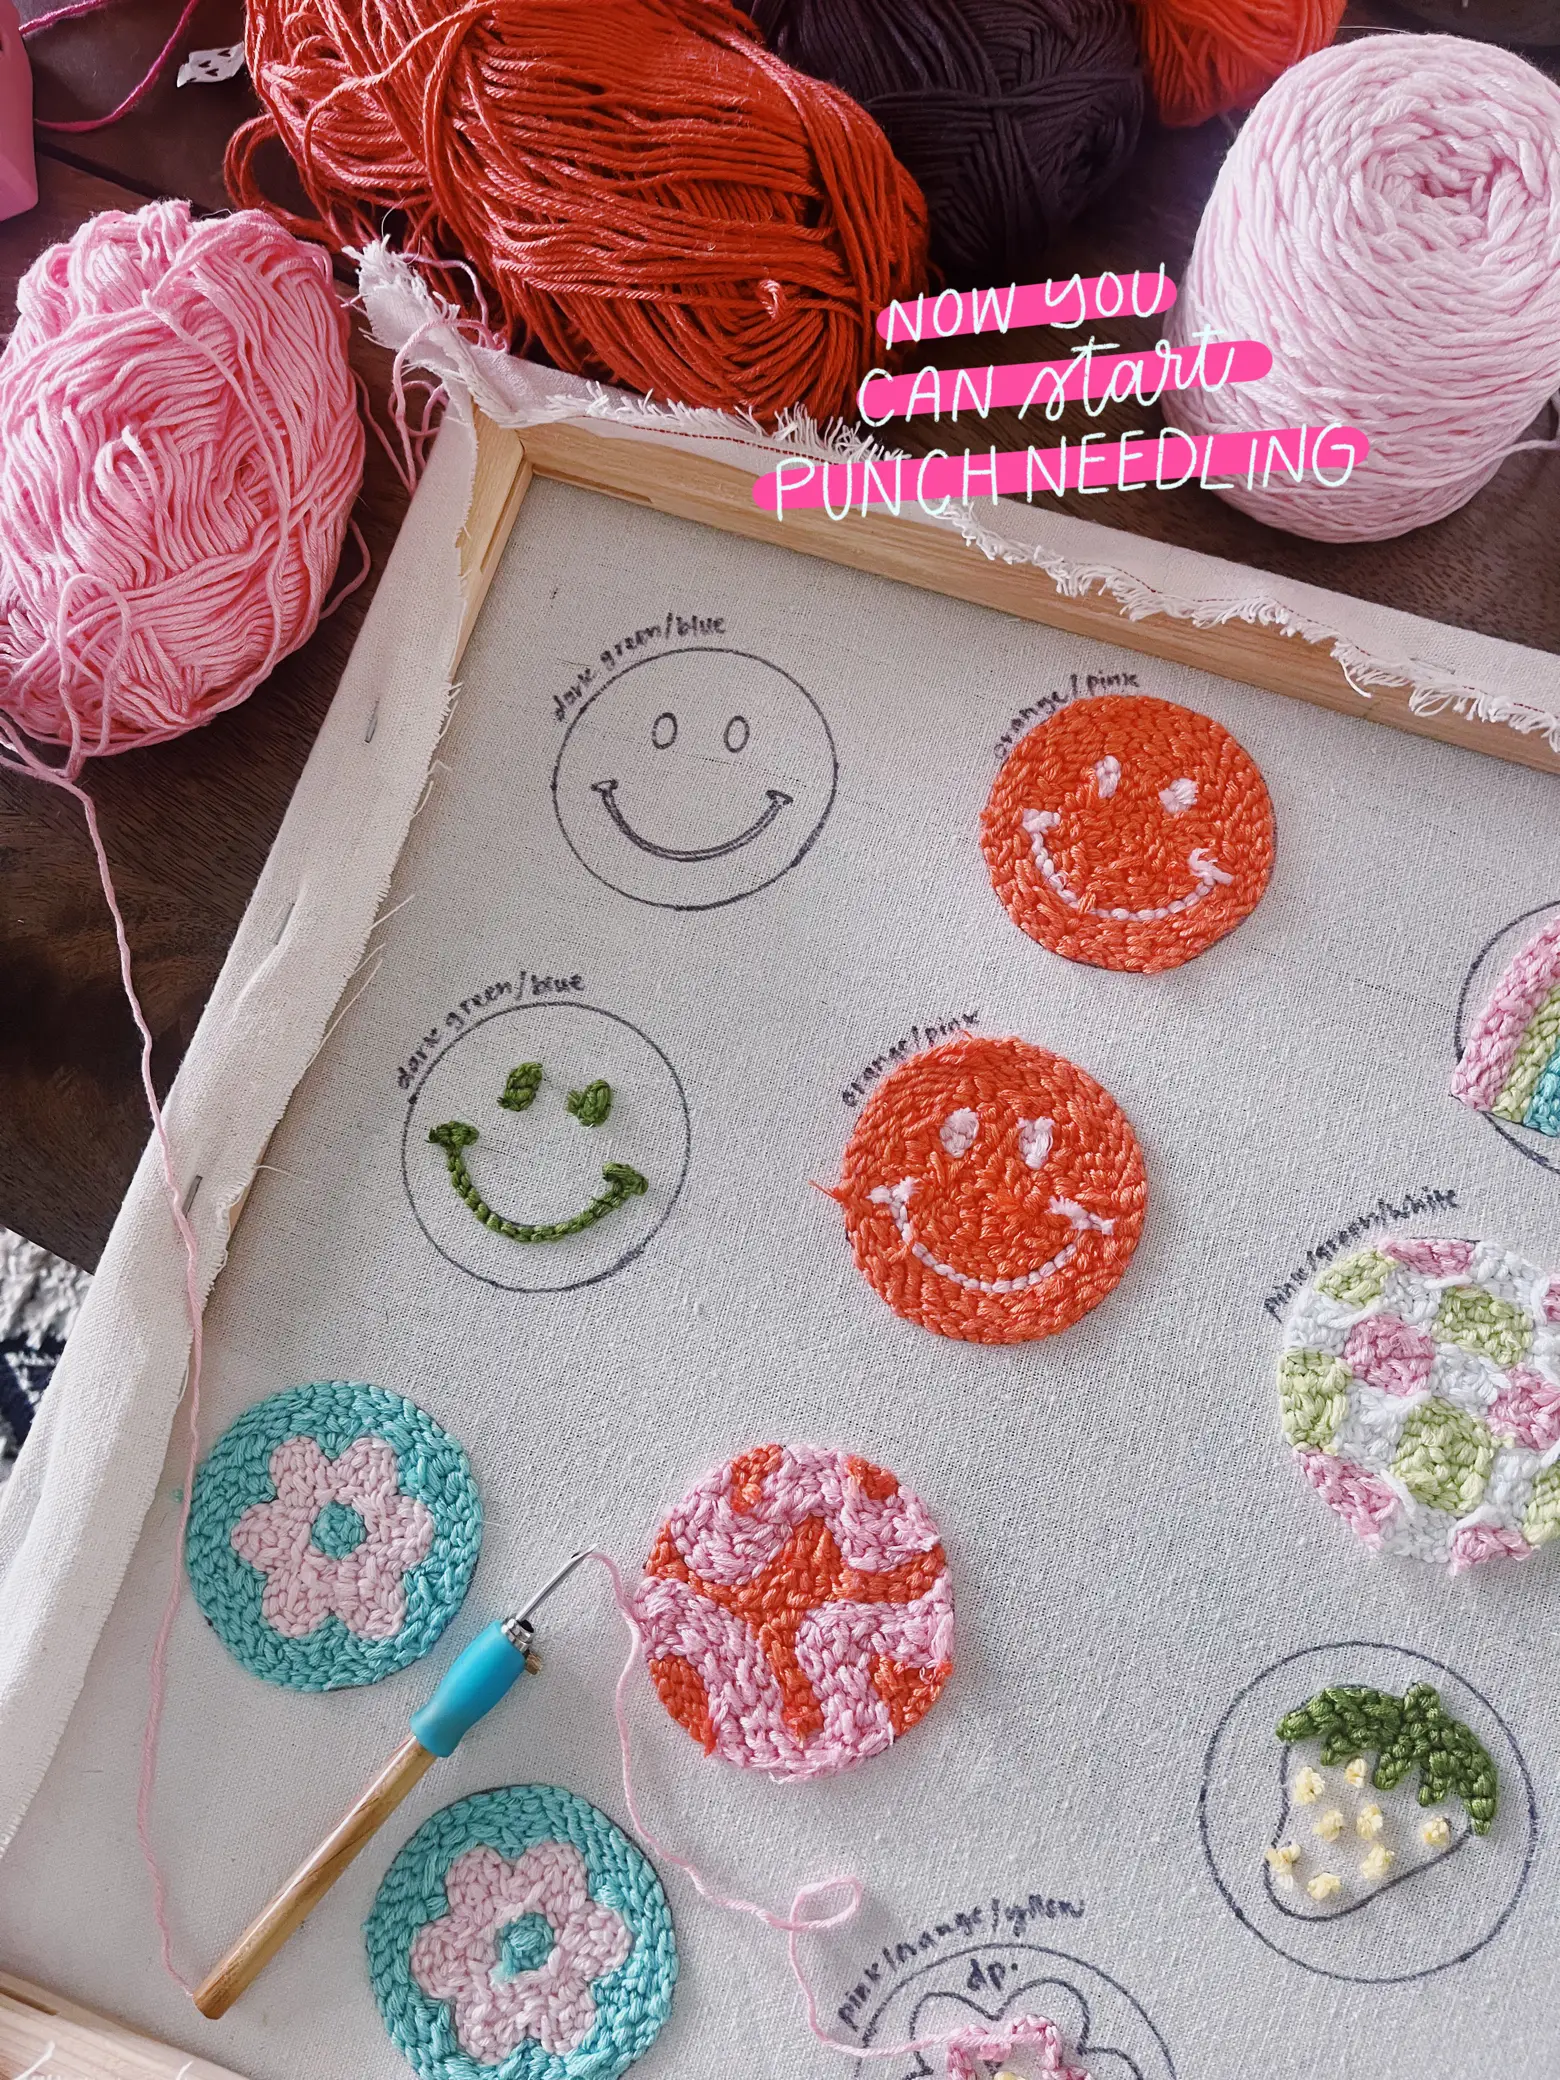 6 Punch Needle Embroidery Patterns: Creating Fun Textures with